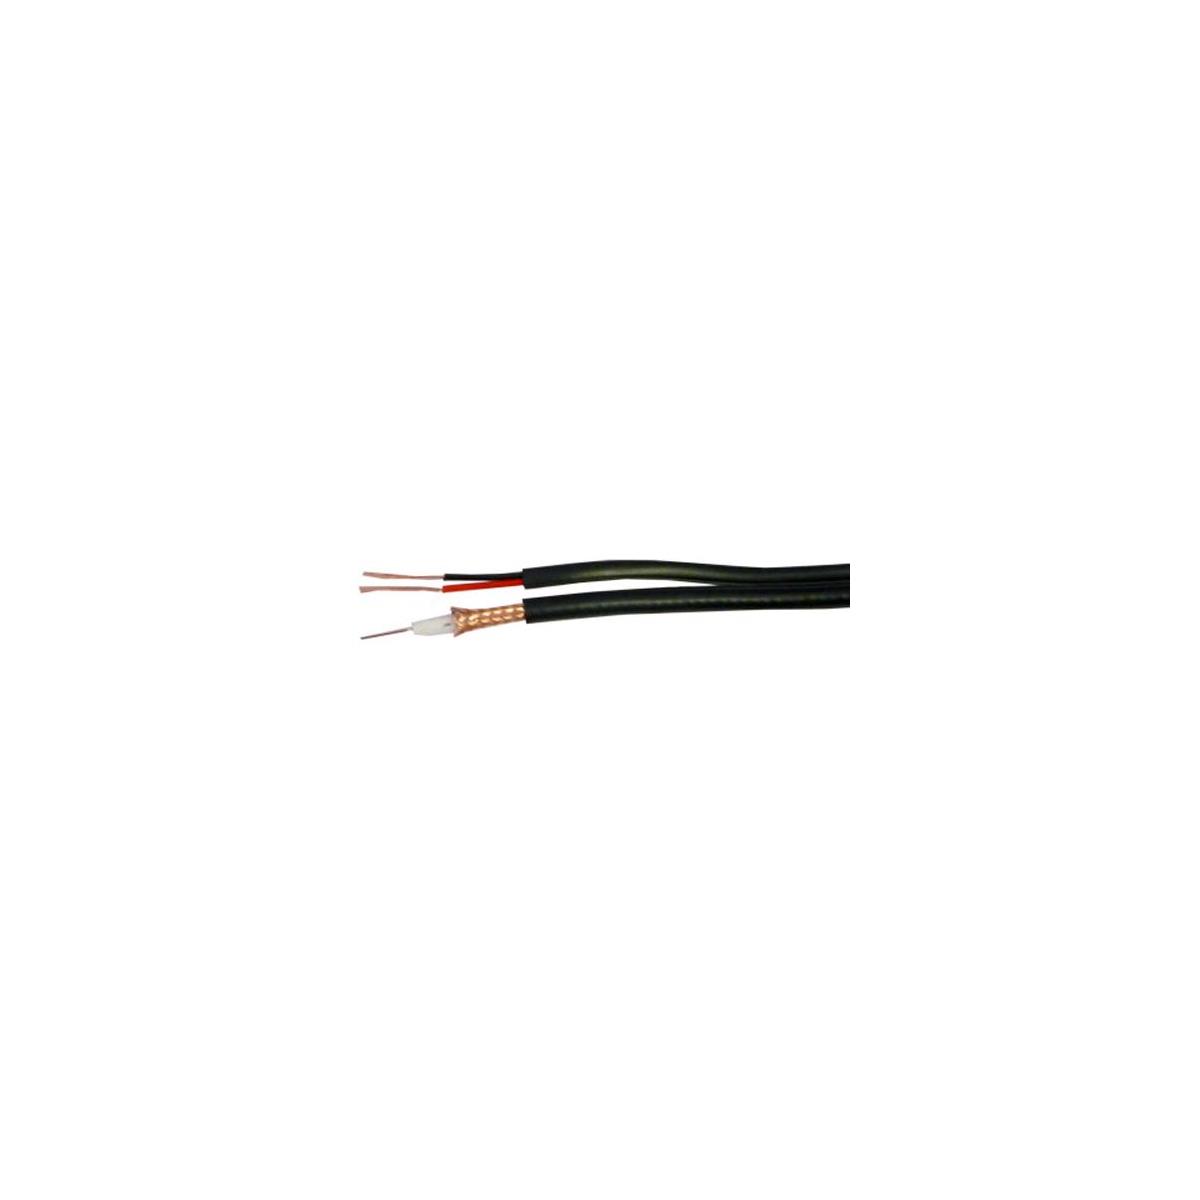 Image of Comprehensive 500' Siamese Security/CCTV Cable with RG59/U + 2x 18AWG